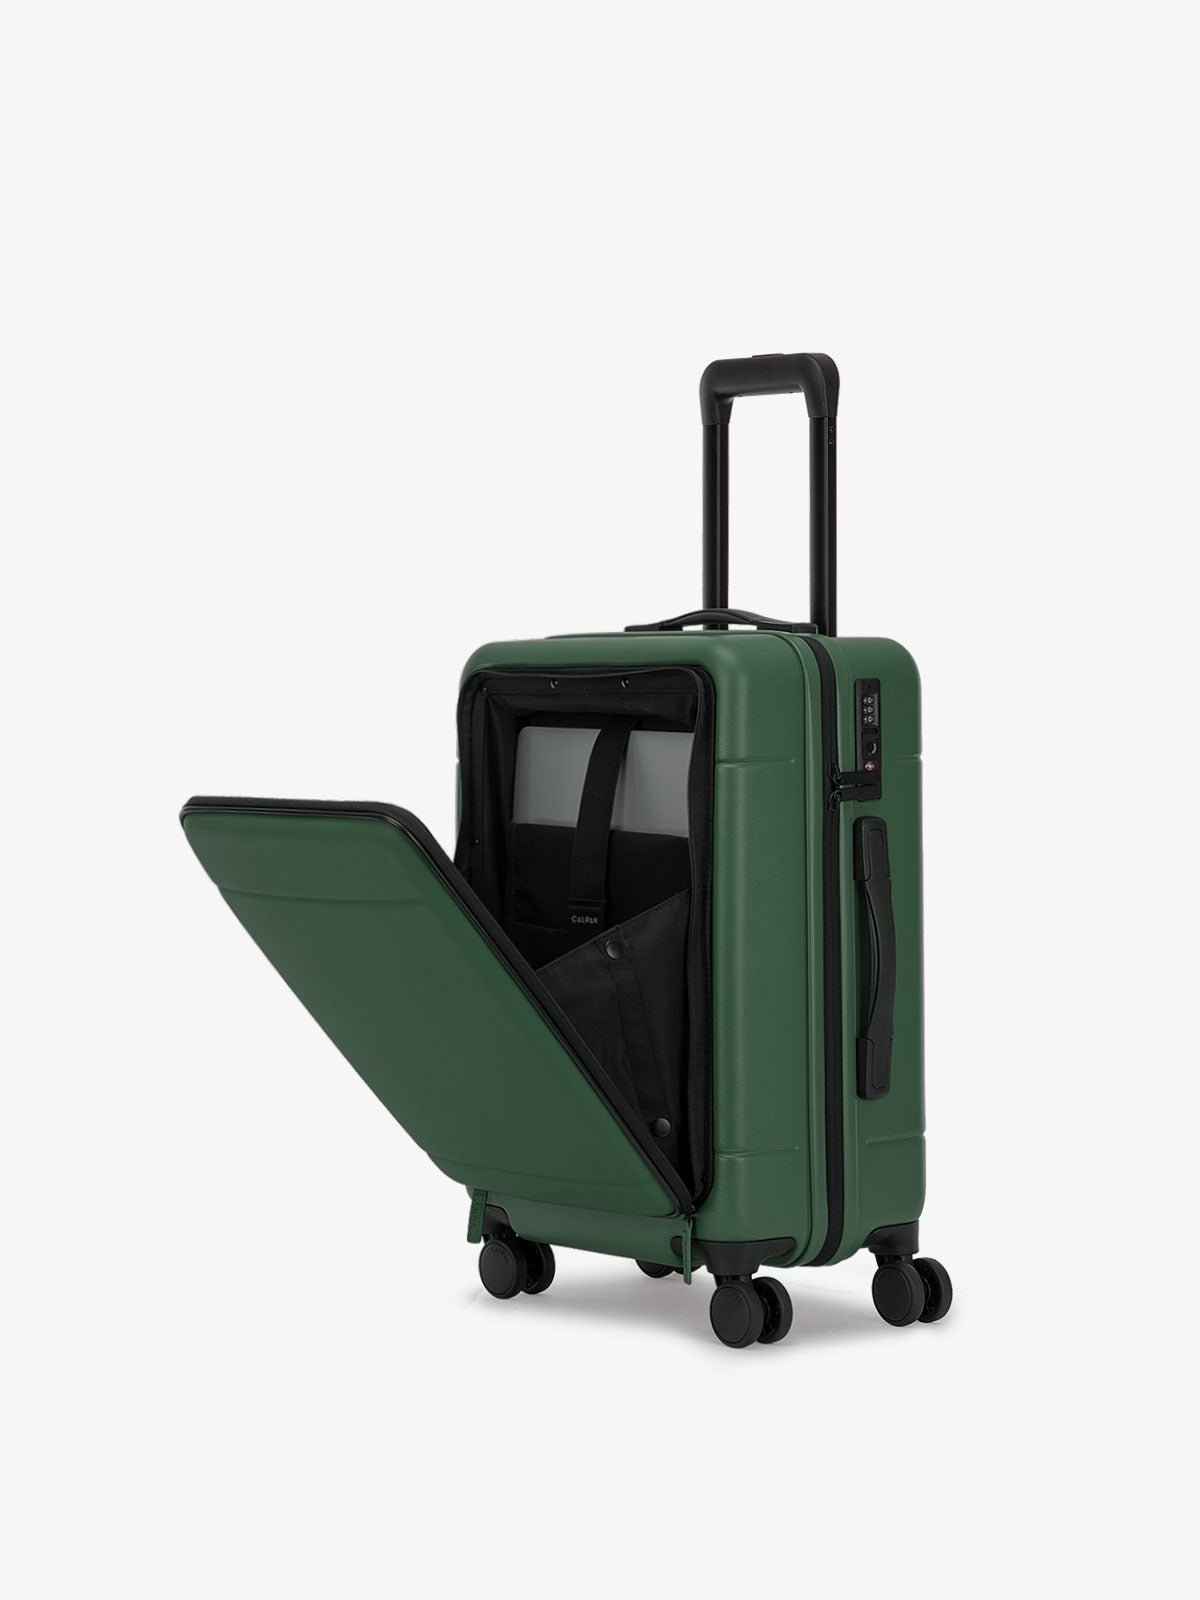 Hue carry-on hard shell luggage with front pocket in emerald green